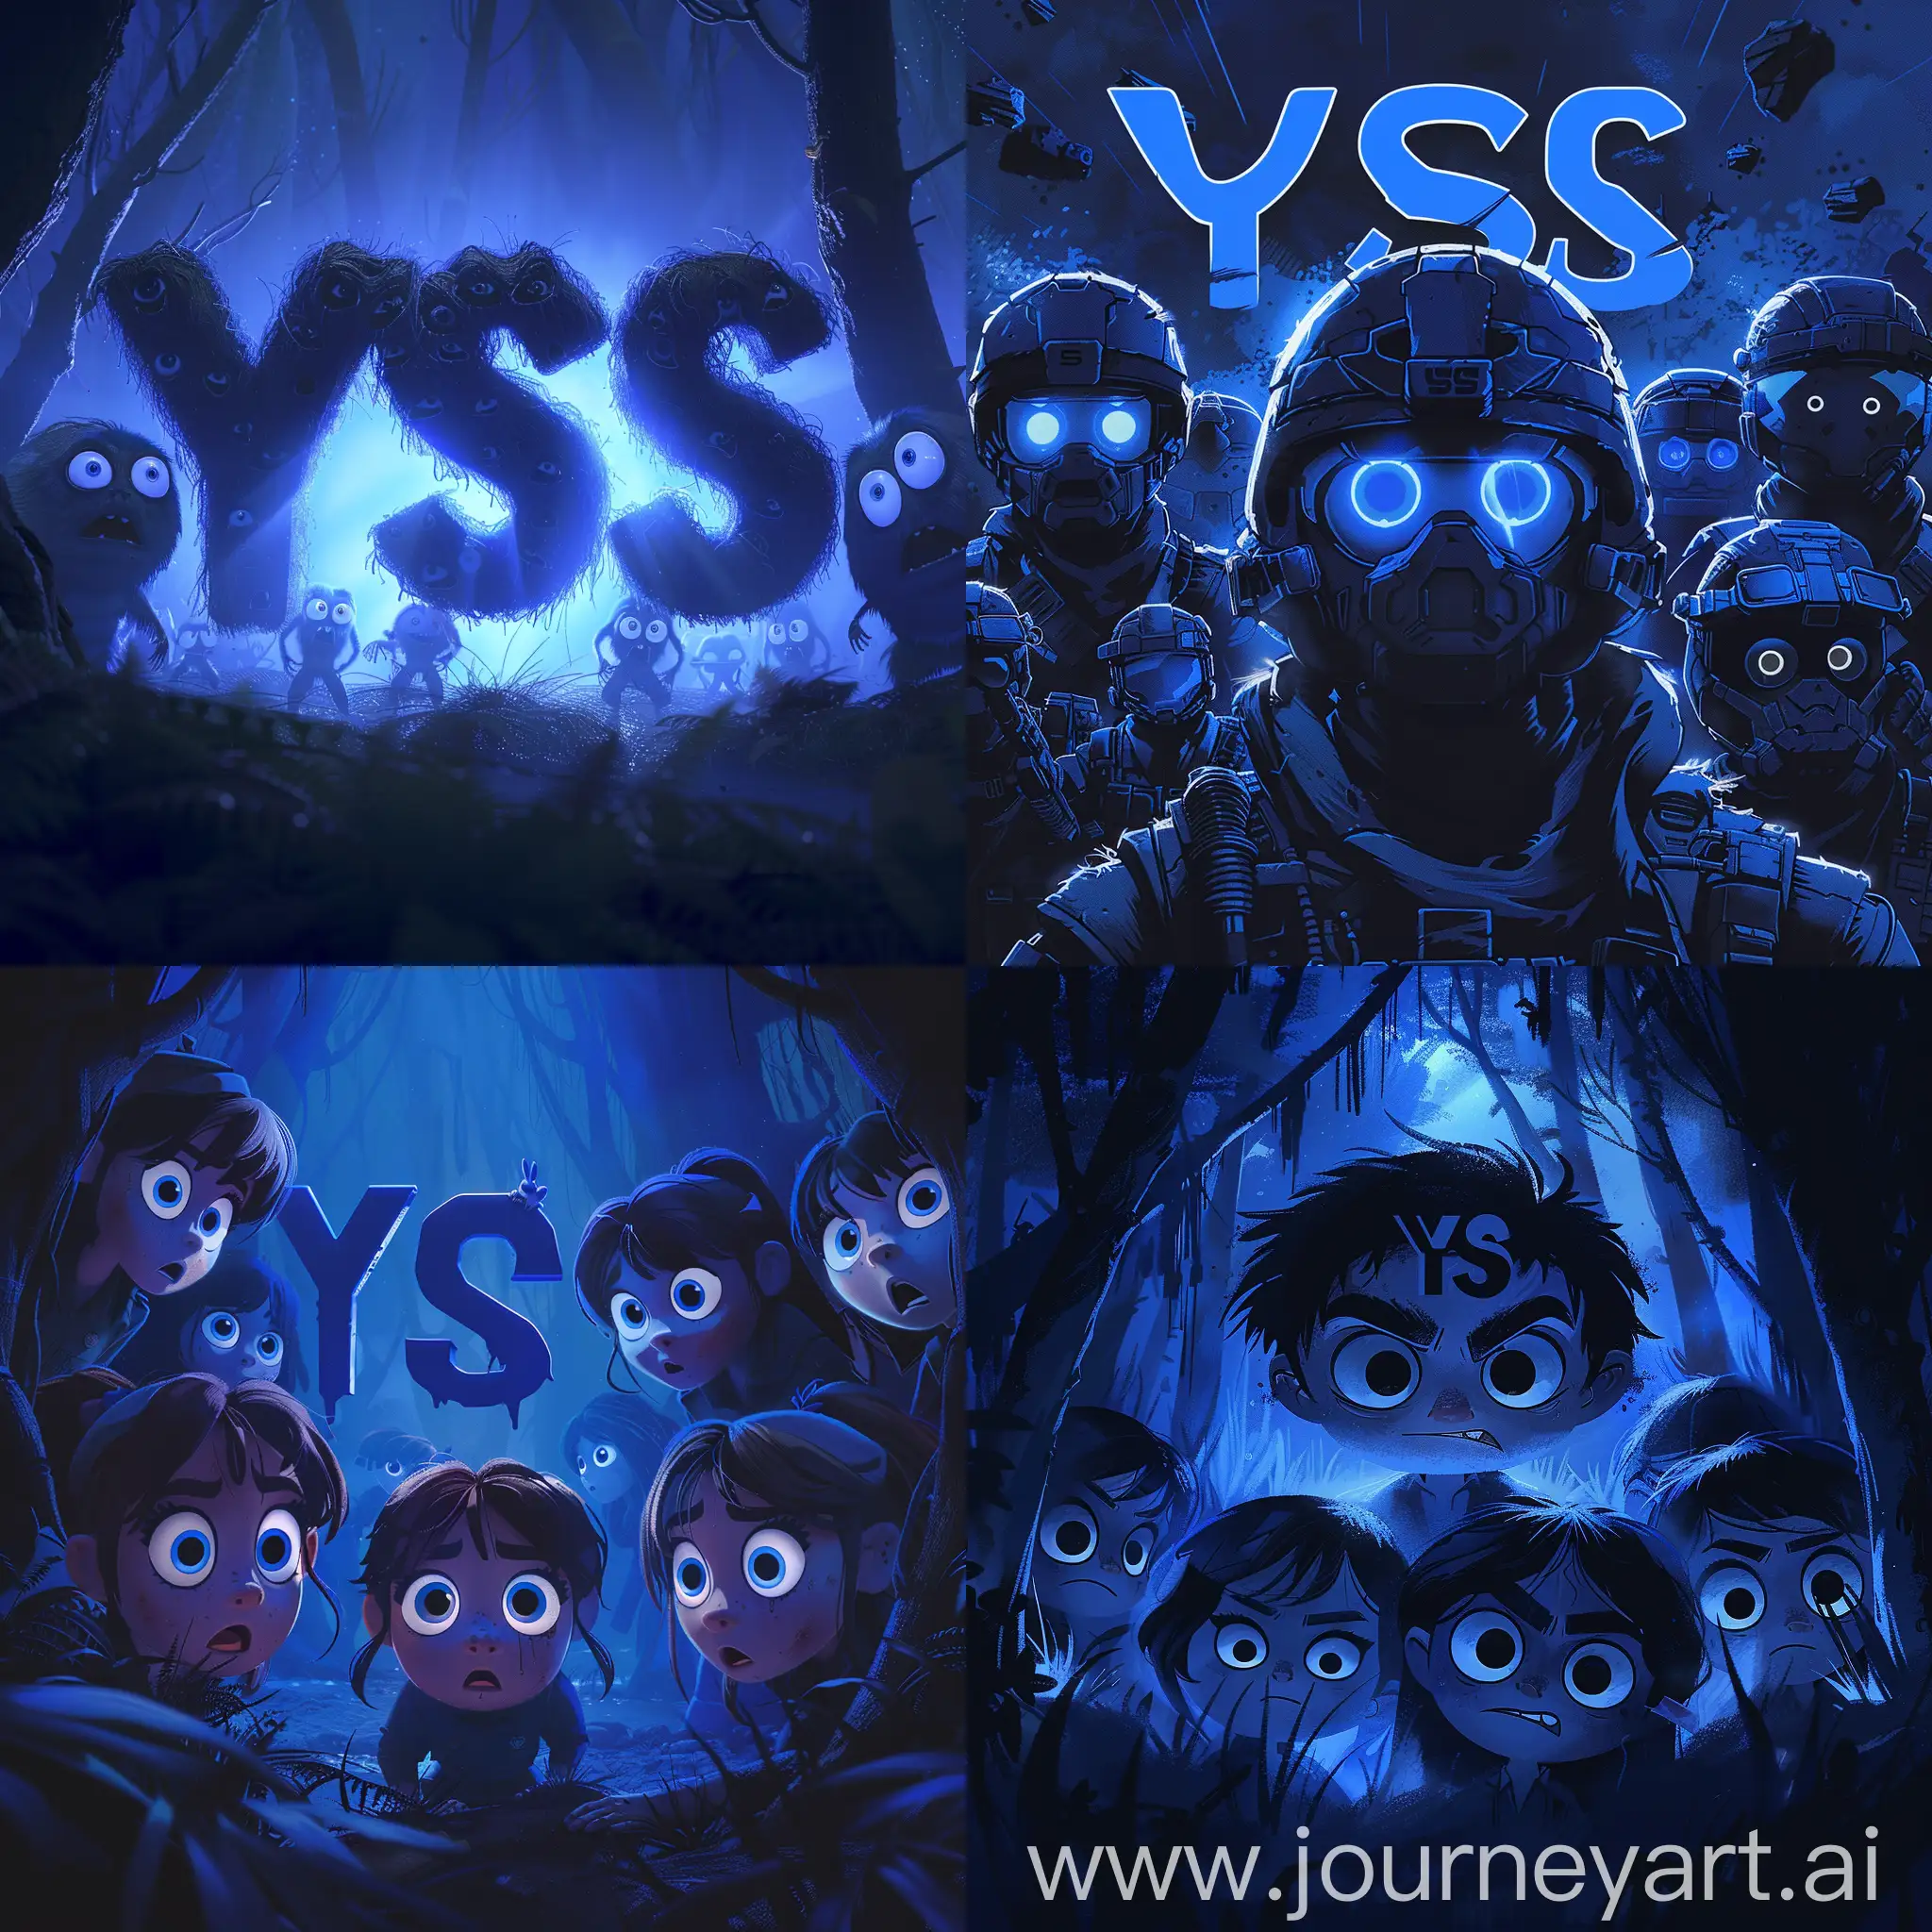 Mysterious-YSS-Emblem-Surrounded-by-Enigmatic-Rangers